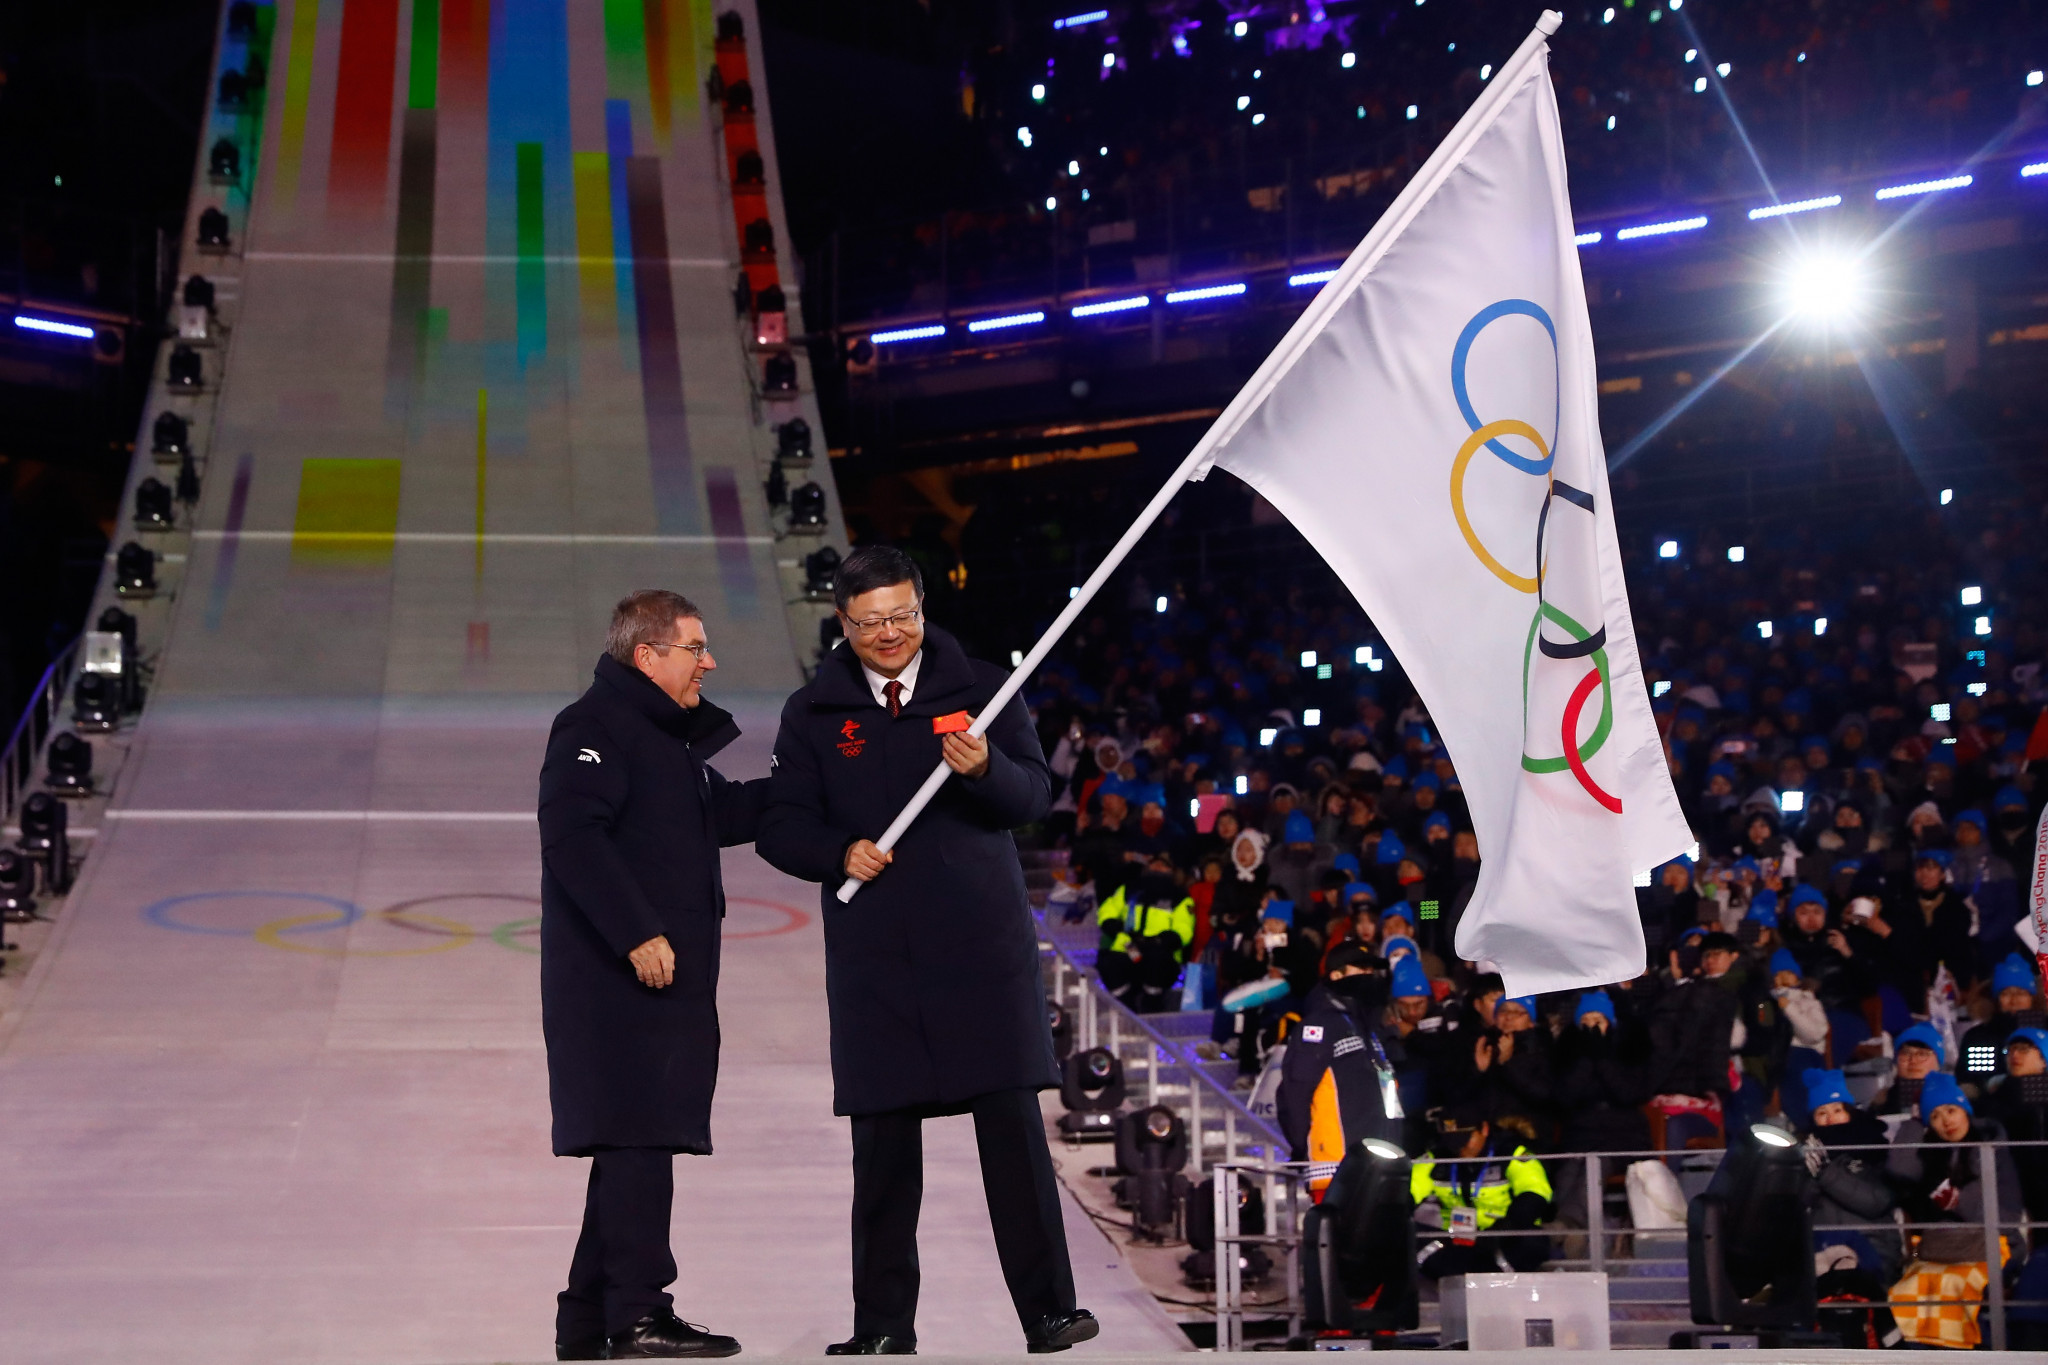 IOC President Thomas Bach praised the joint Korean presence at the Games during the Closing Ceremony ©Getty Images